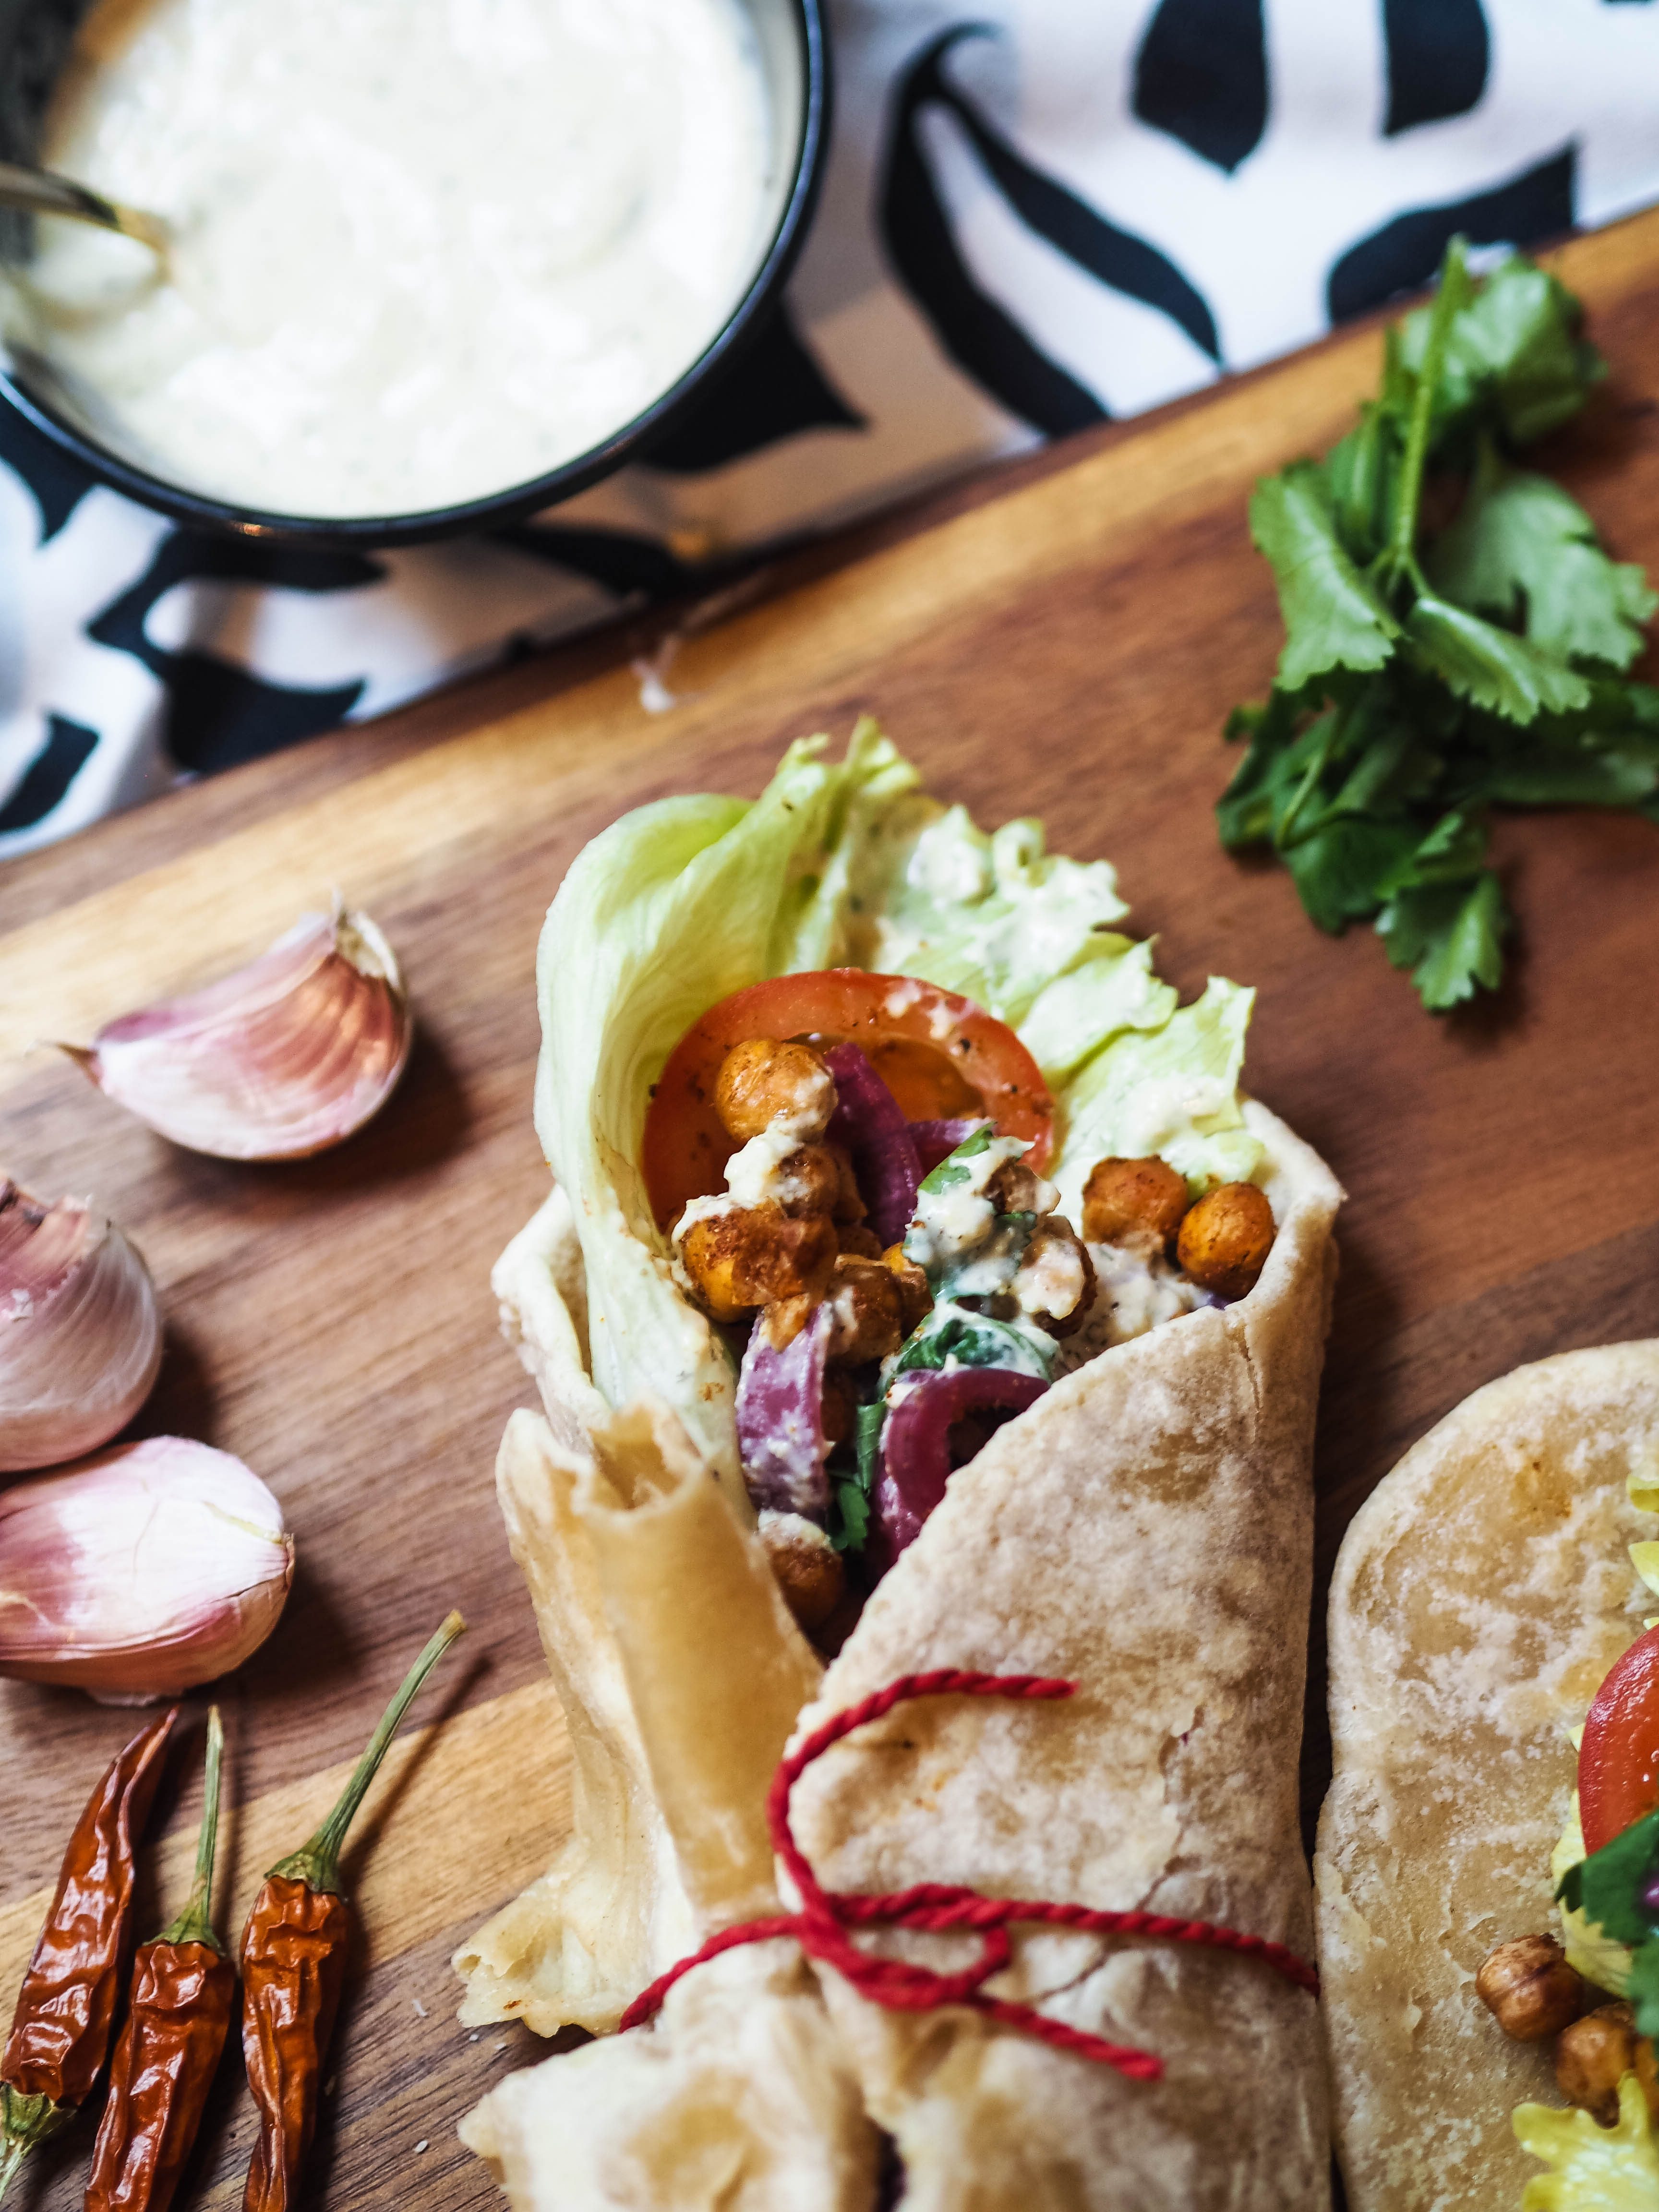 The best ever chickpea wrap - middle eastern style!